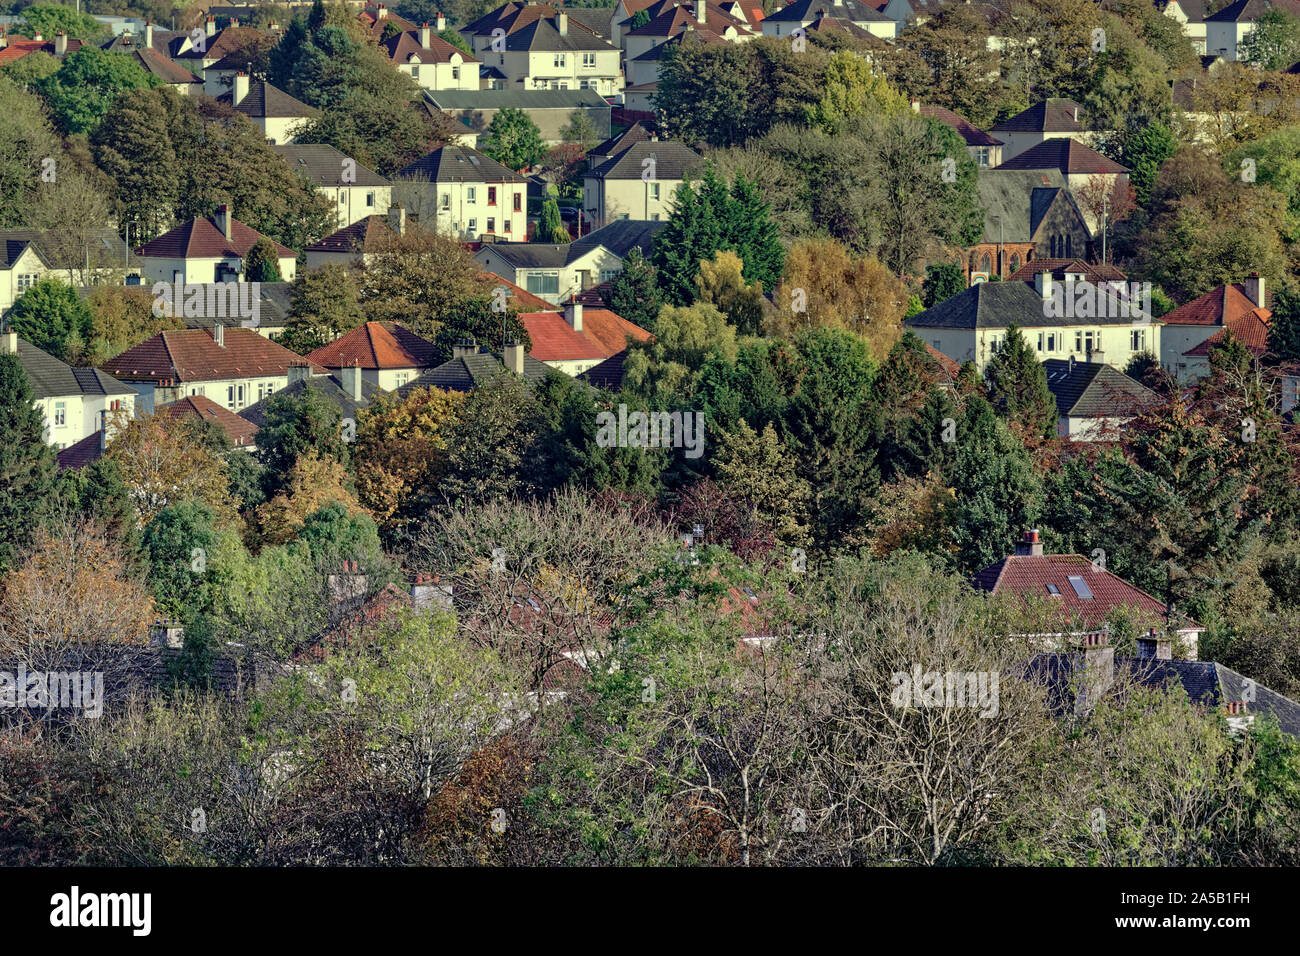 Glasgow, Scotland, UK 19th October, 2019. UK Weather: Glorious Autumnal colour as fine Indian summer weather made an appearance to bring out the best of the changing flora in the west end of the city in the suburb of Knightswood. Gerard Ferry/ Alamy Live News Stock Photo